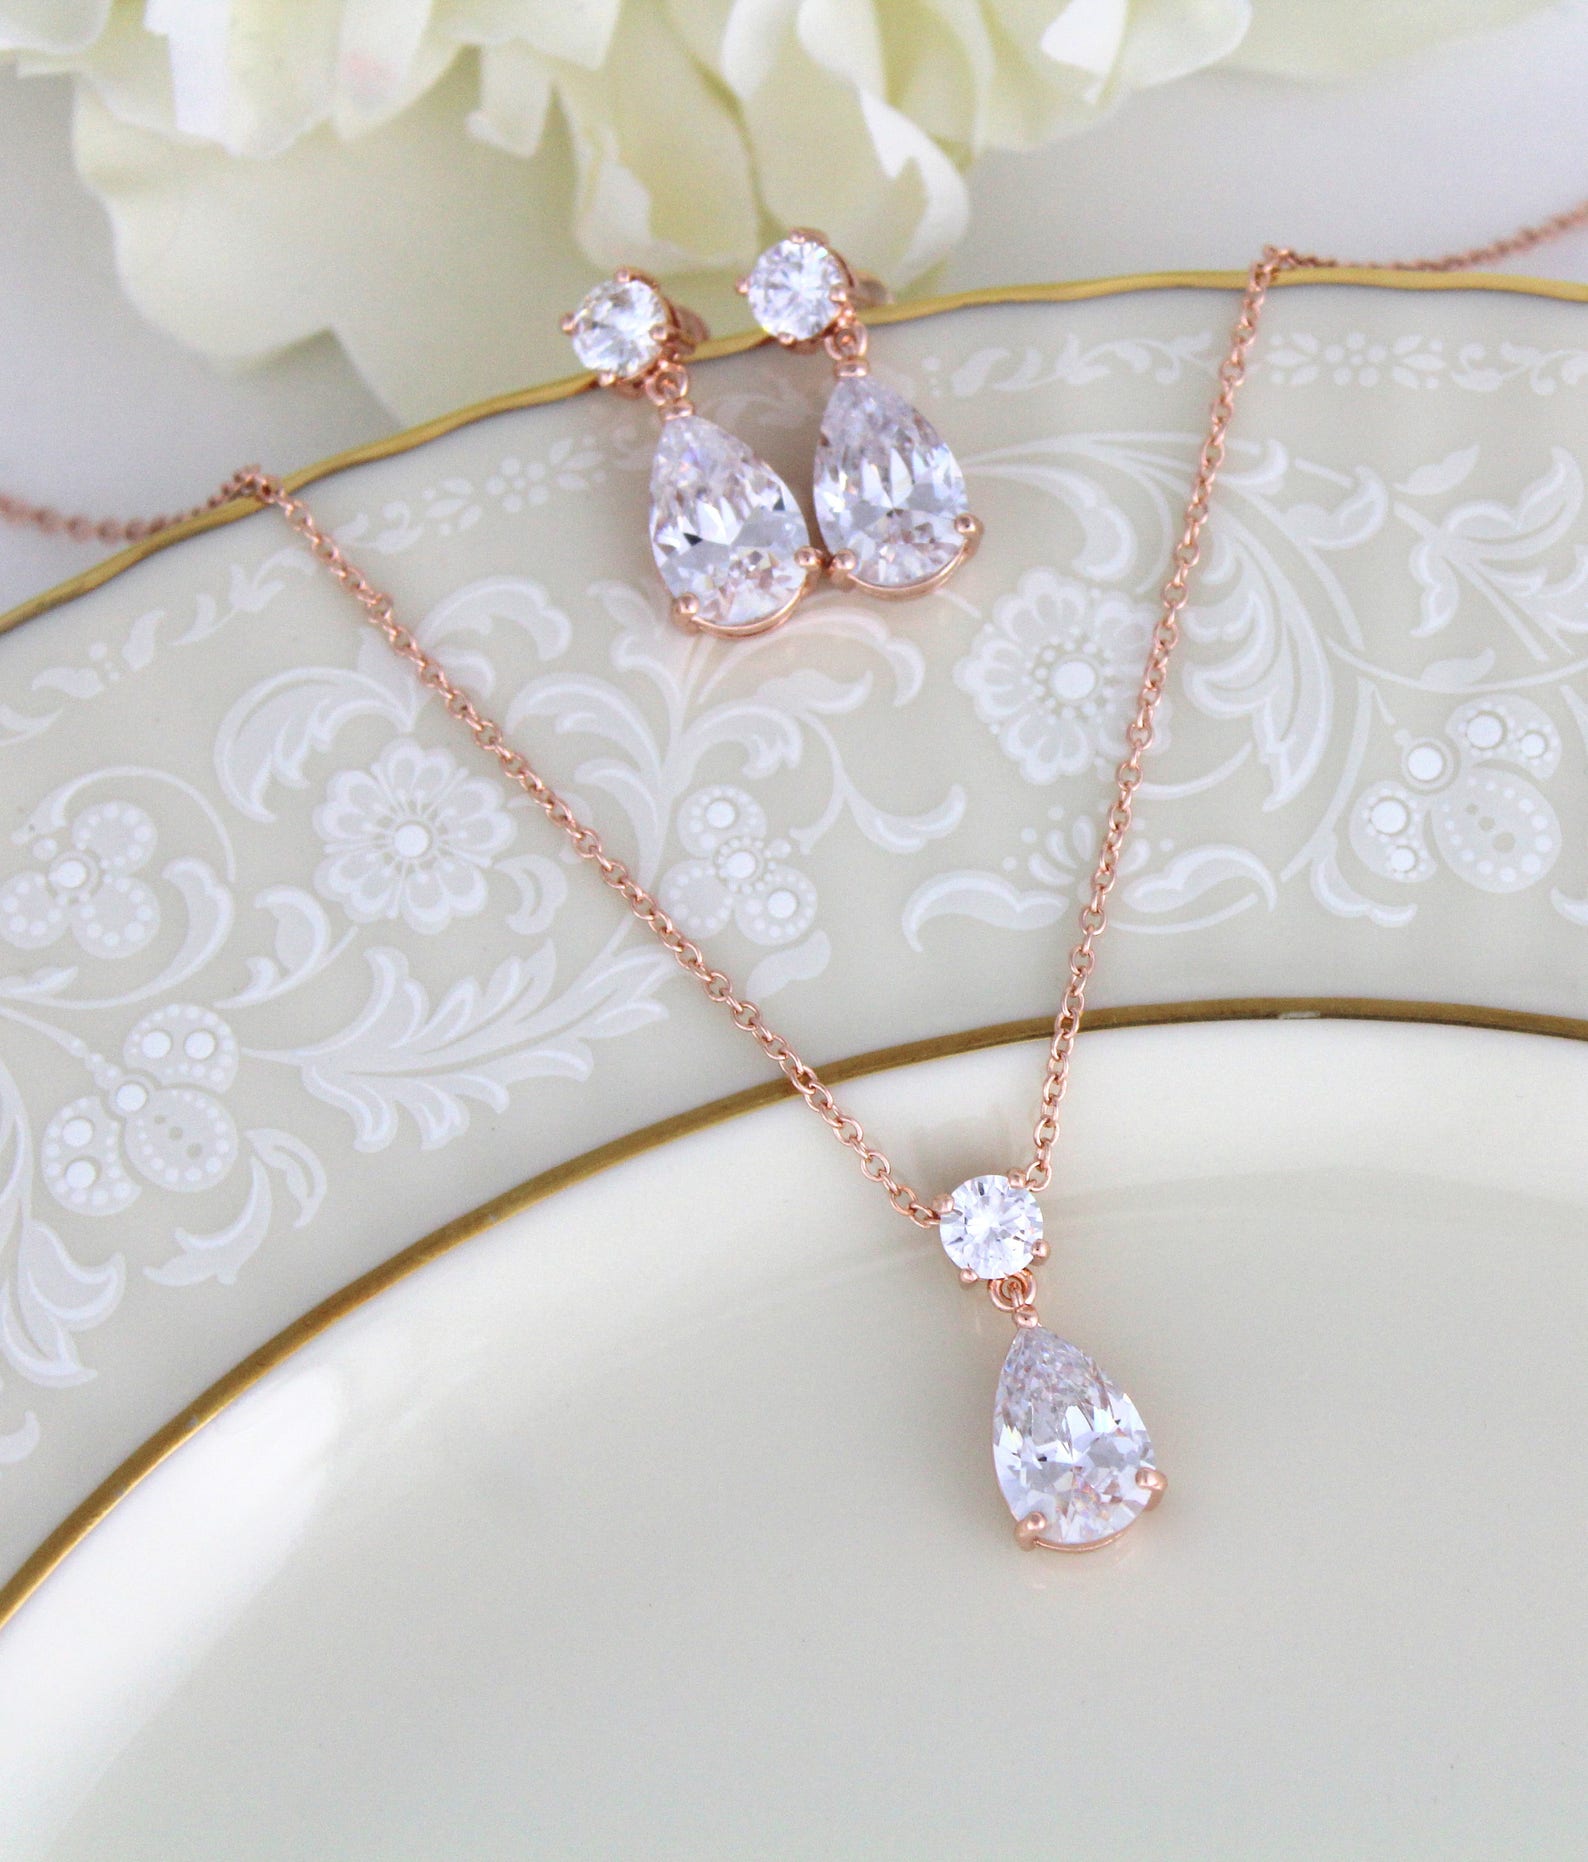 Dainty Rose gold necklace and earring set Bridal jewelry | Etsy